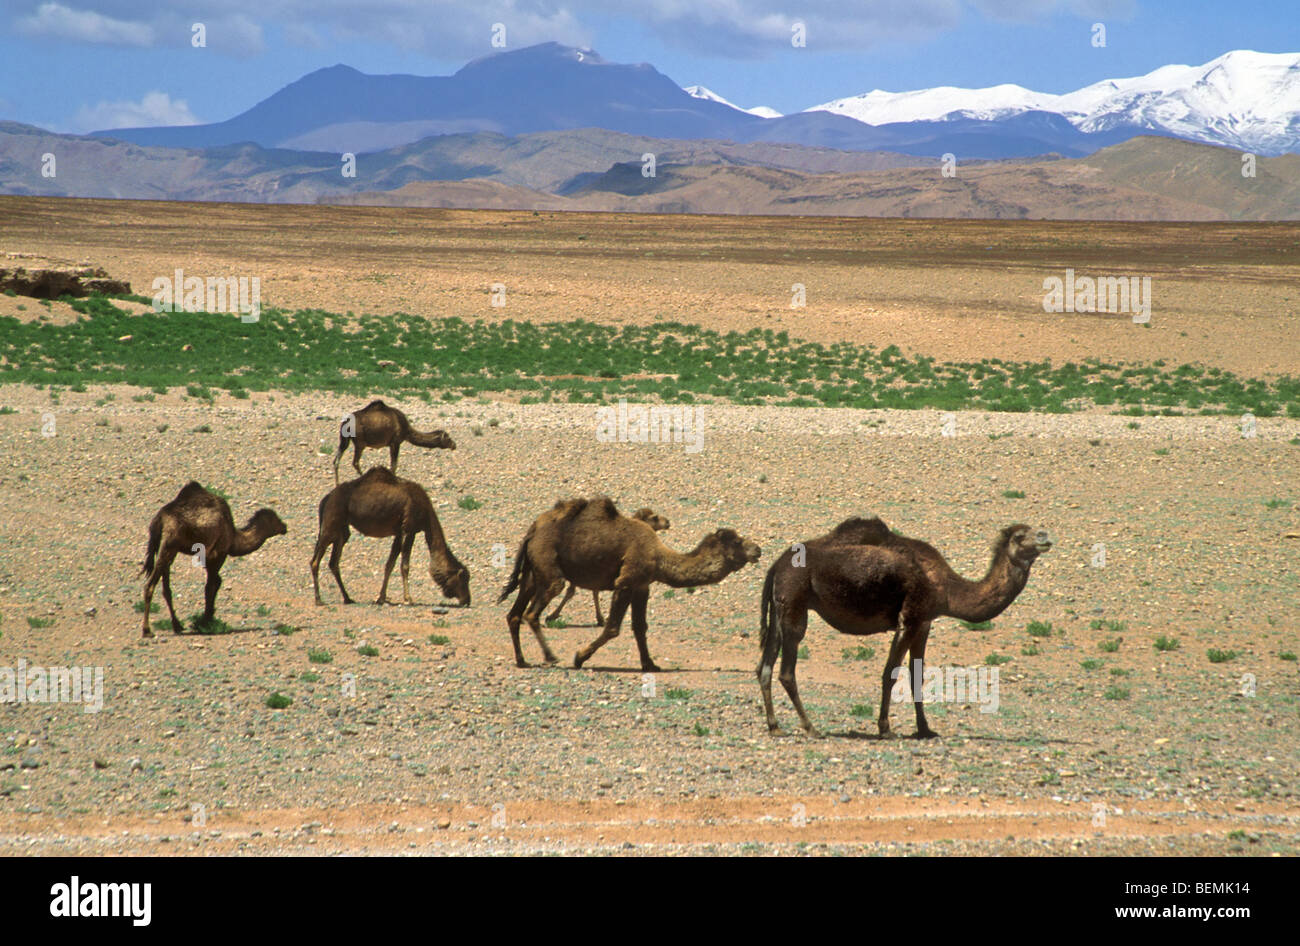 Herd of dromedary camels (Camelus dromedarius) in desert with view on the High Atlas mountains, Morocco Stock Photo